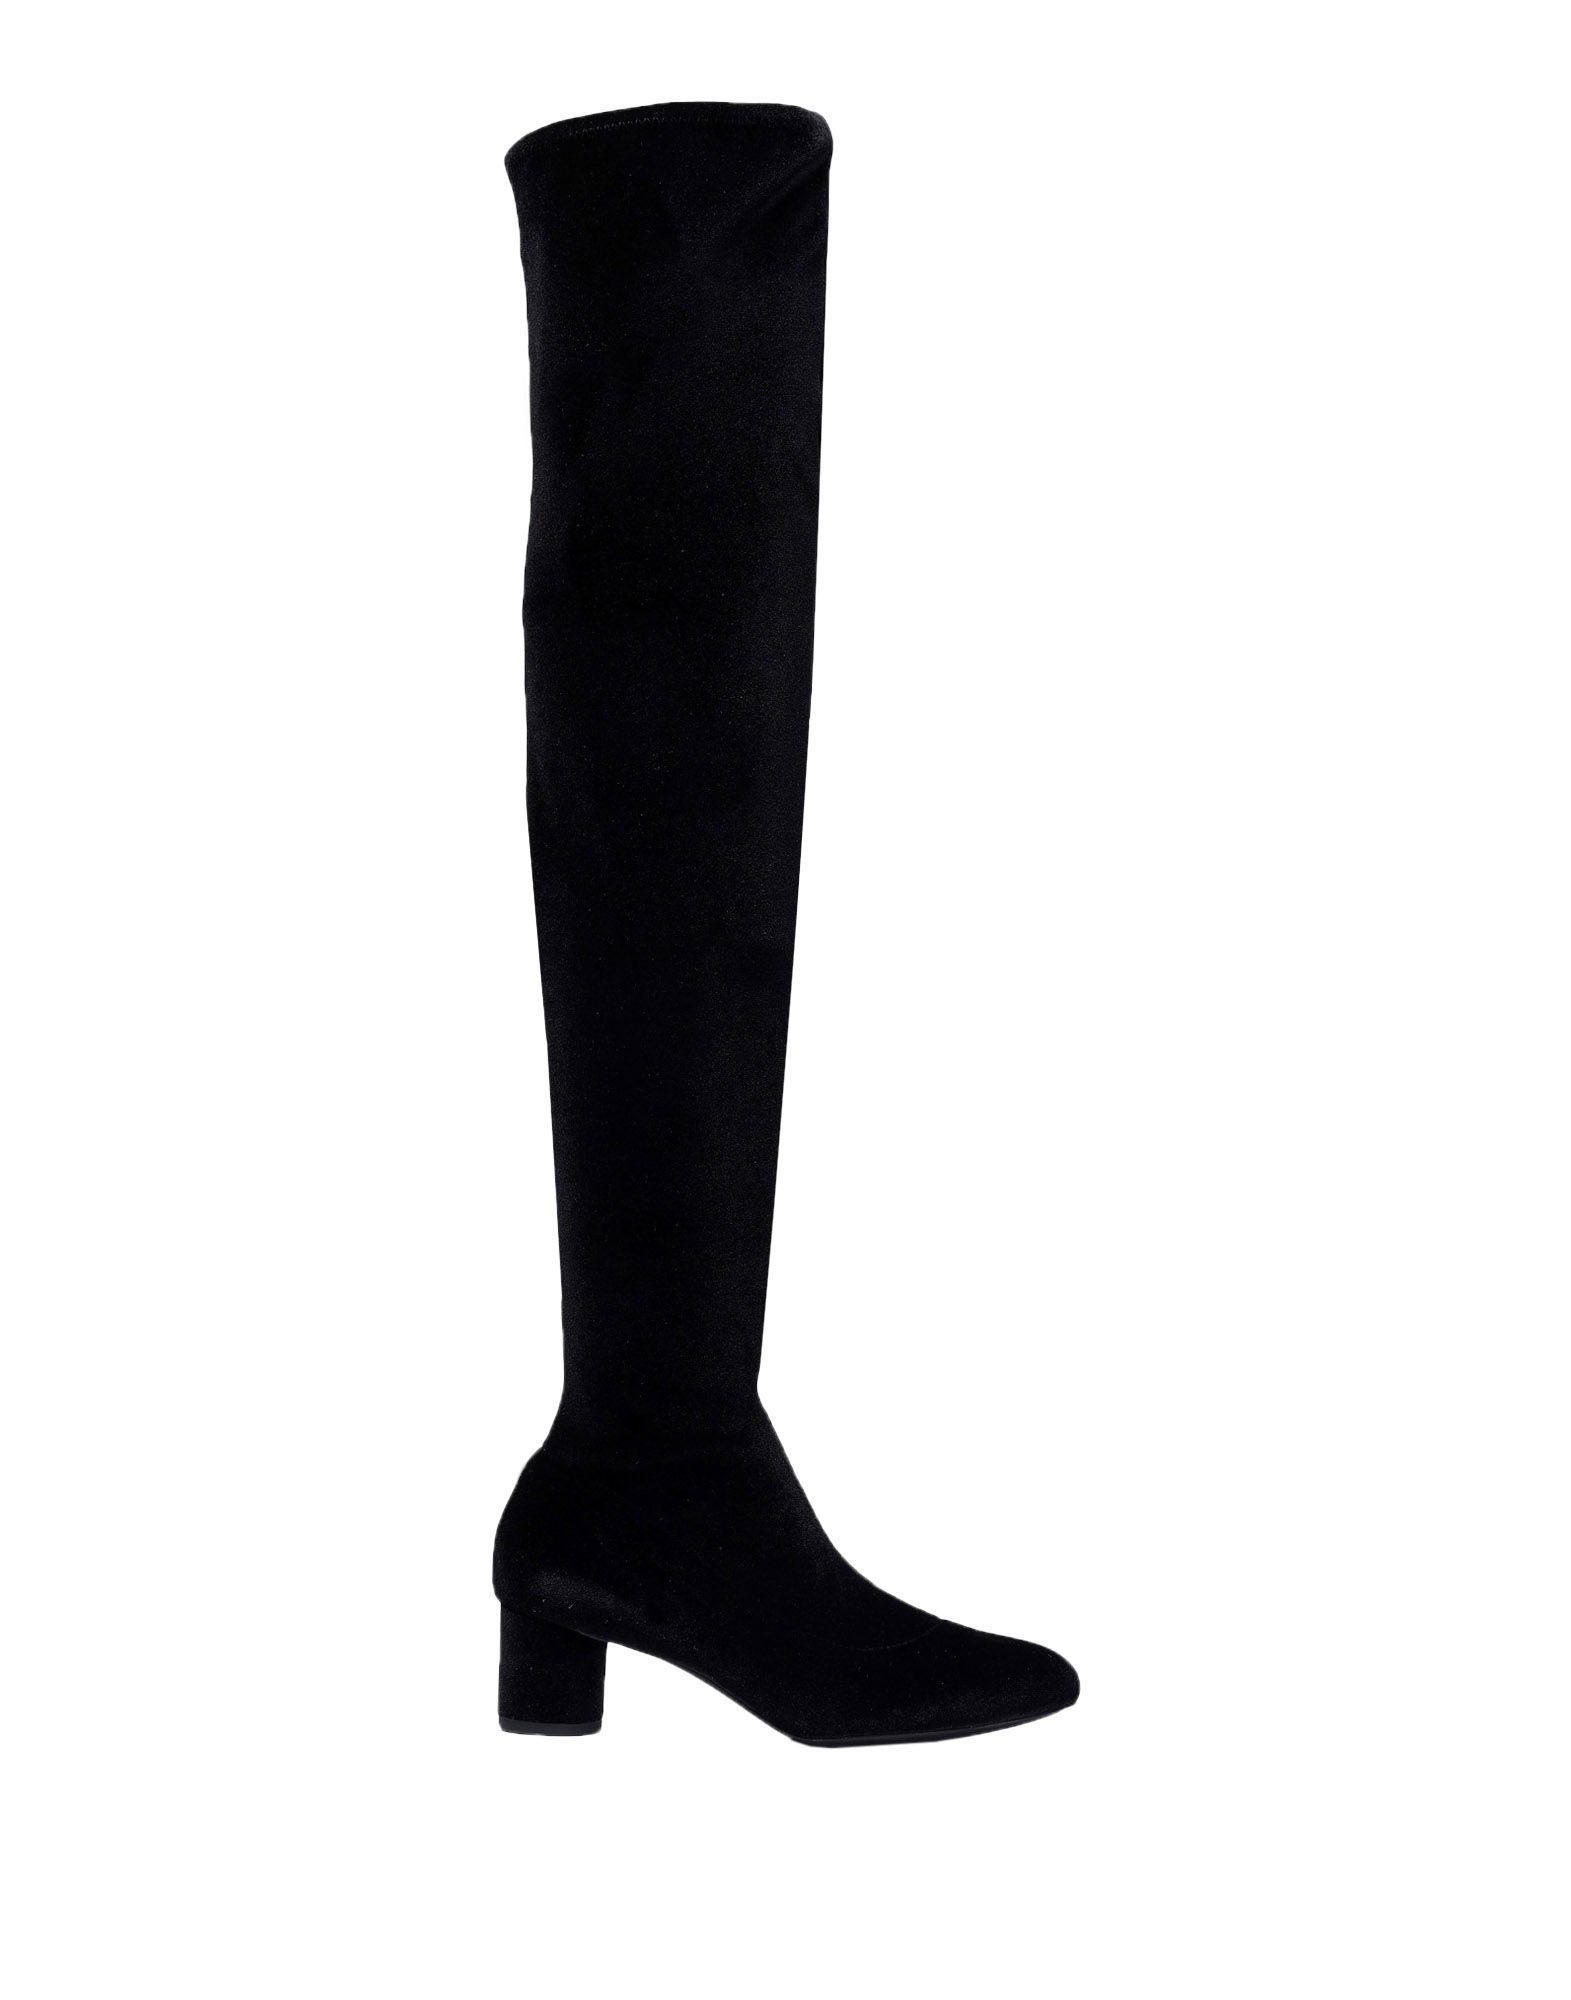 stella luna over the knee boots